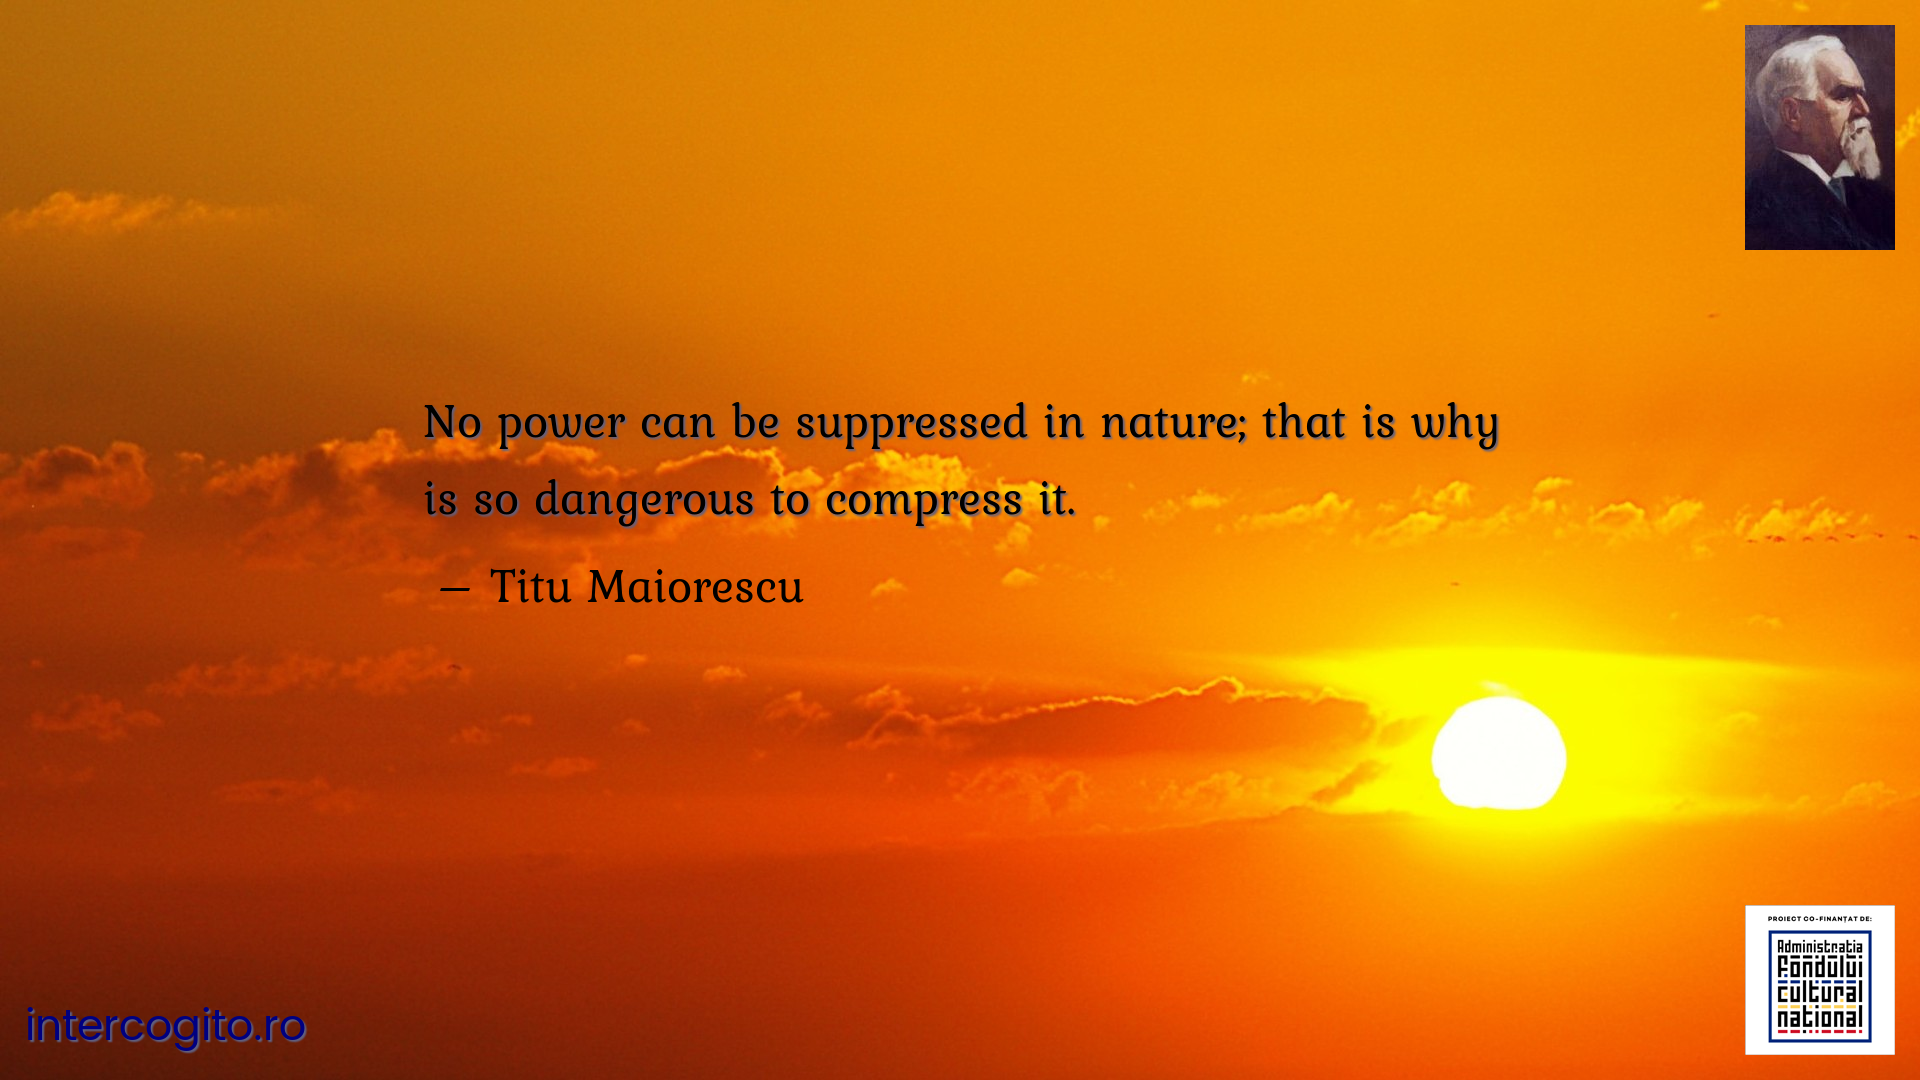 No power can be suppressed in nature; that is why is so dangerous to compress it.